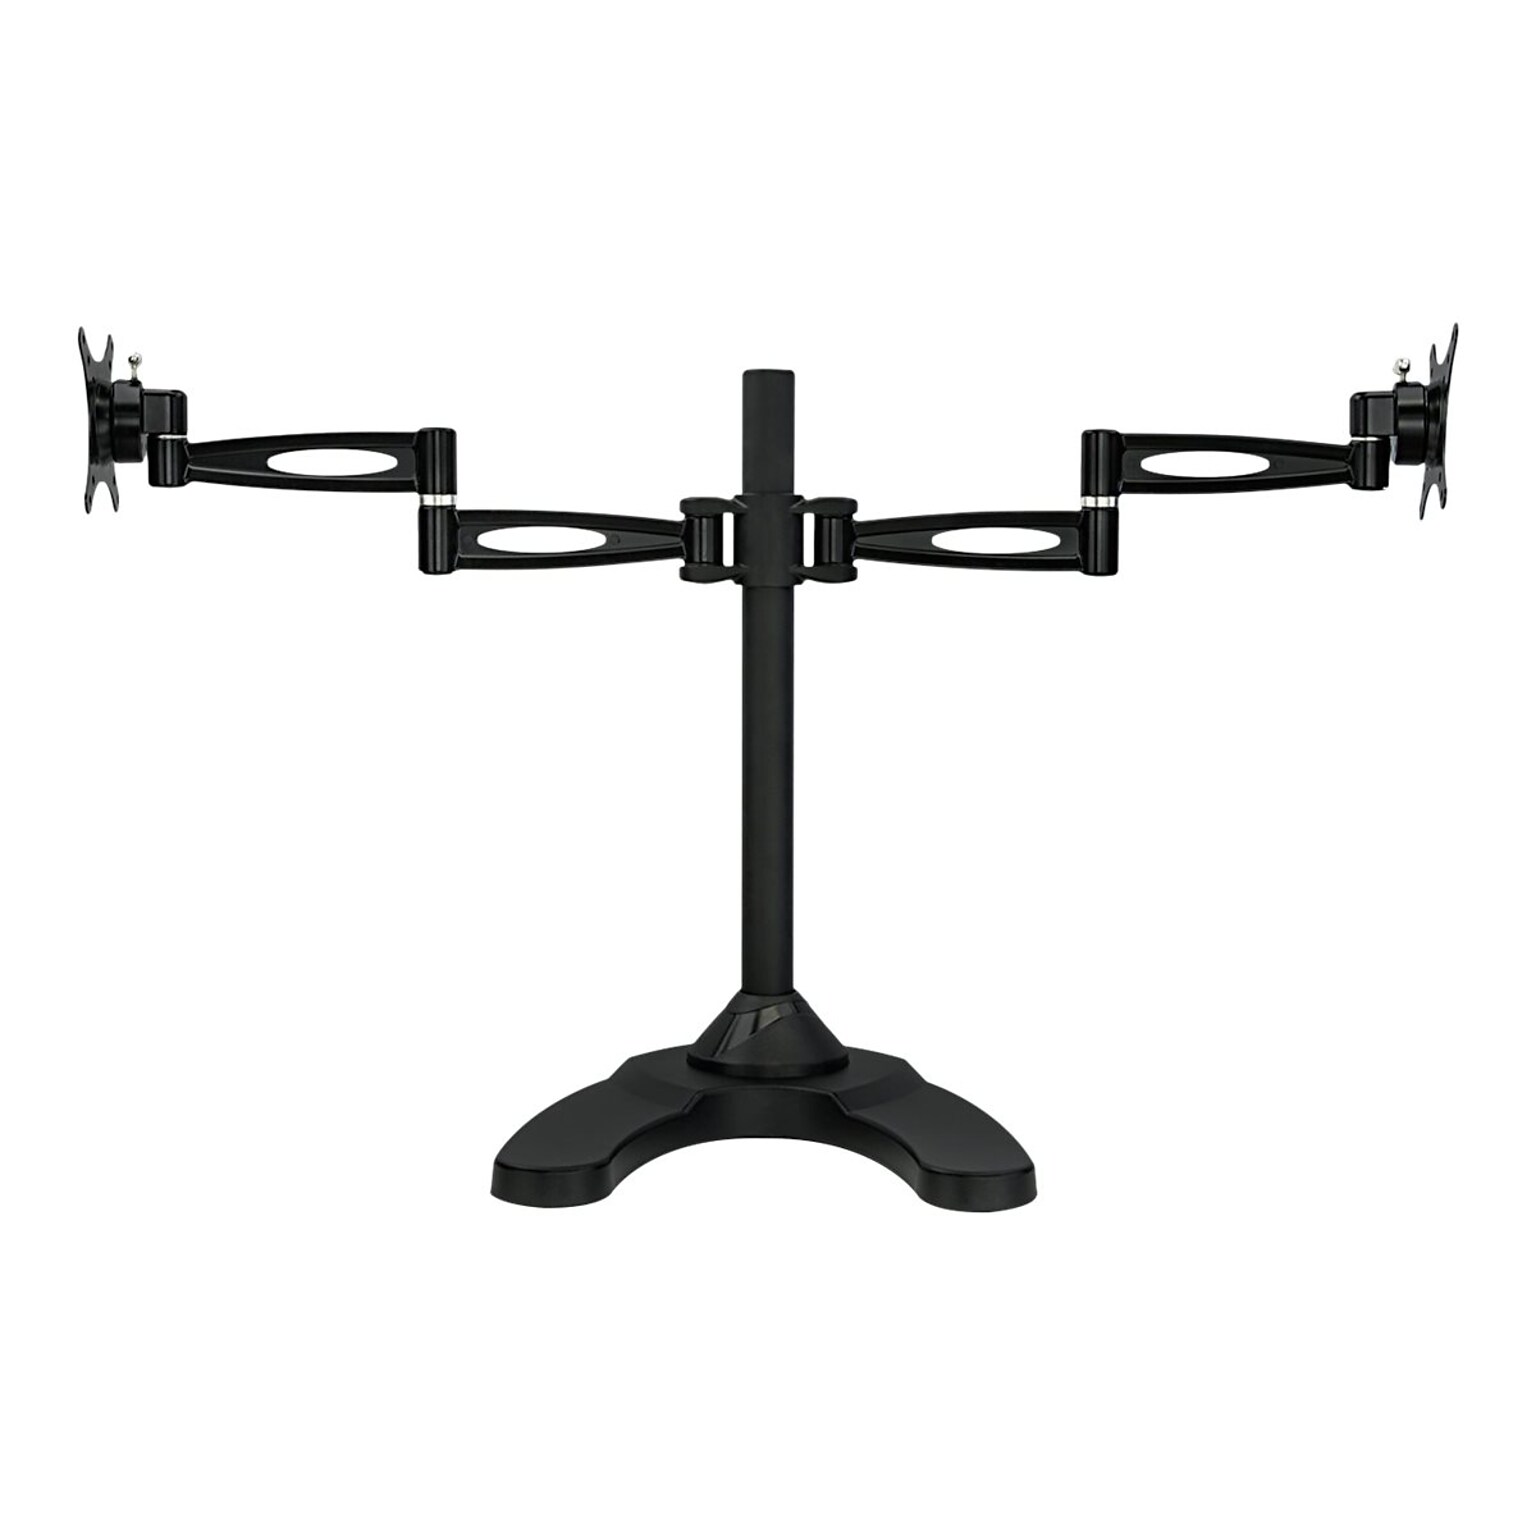 Mount-It! Dual Monitor Stand, Up To 27 Monitors, Black (MI-792)